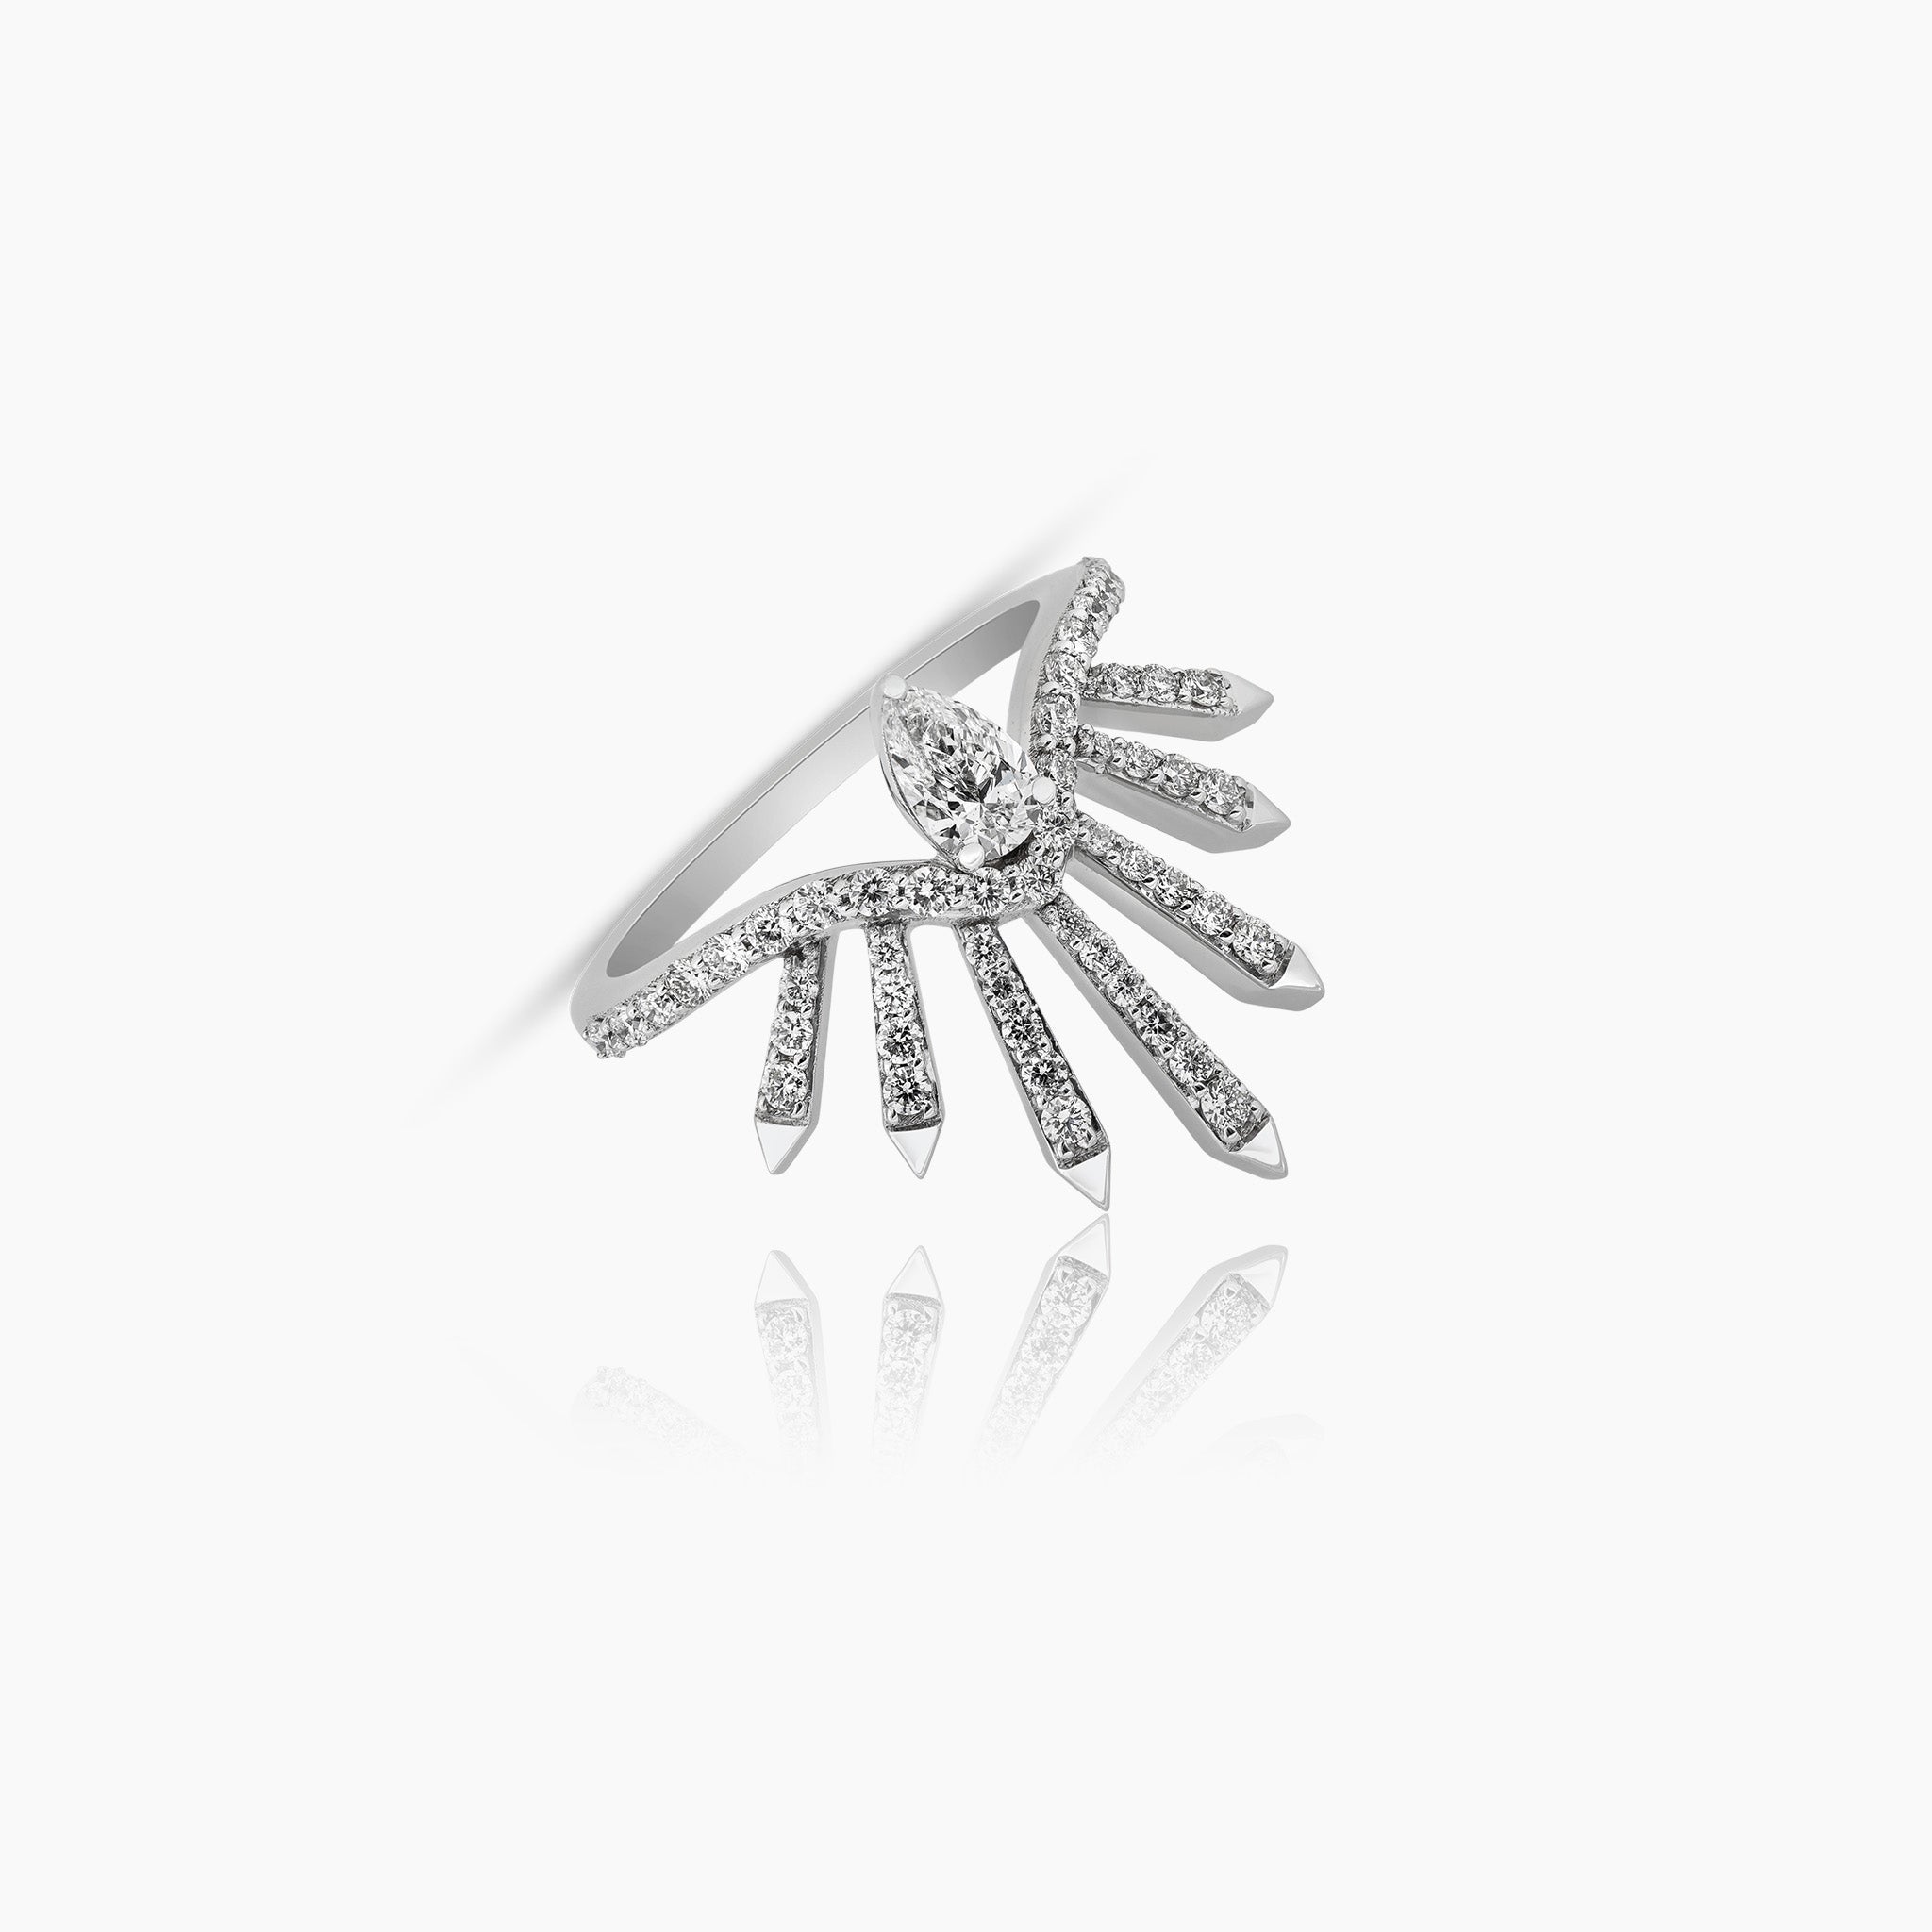 Dragon Ring: Crafted in white gold and adorned with diamonds, displayed against an off-white background.